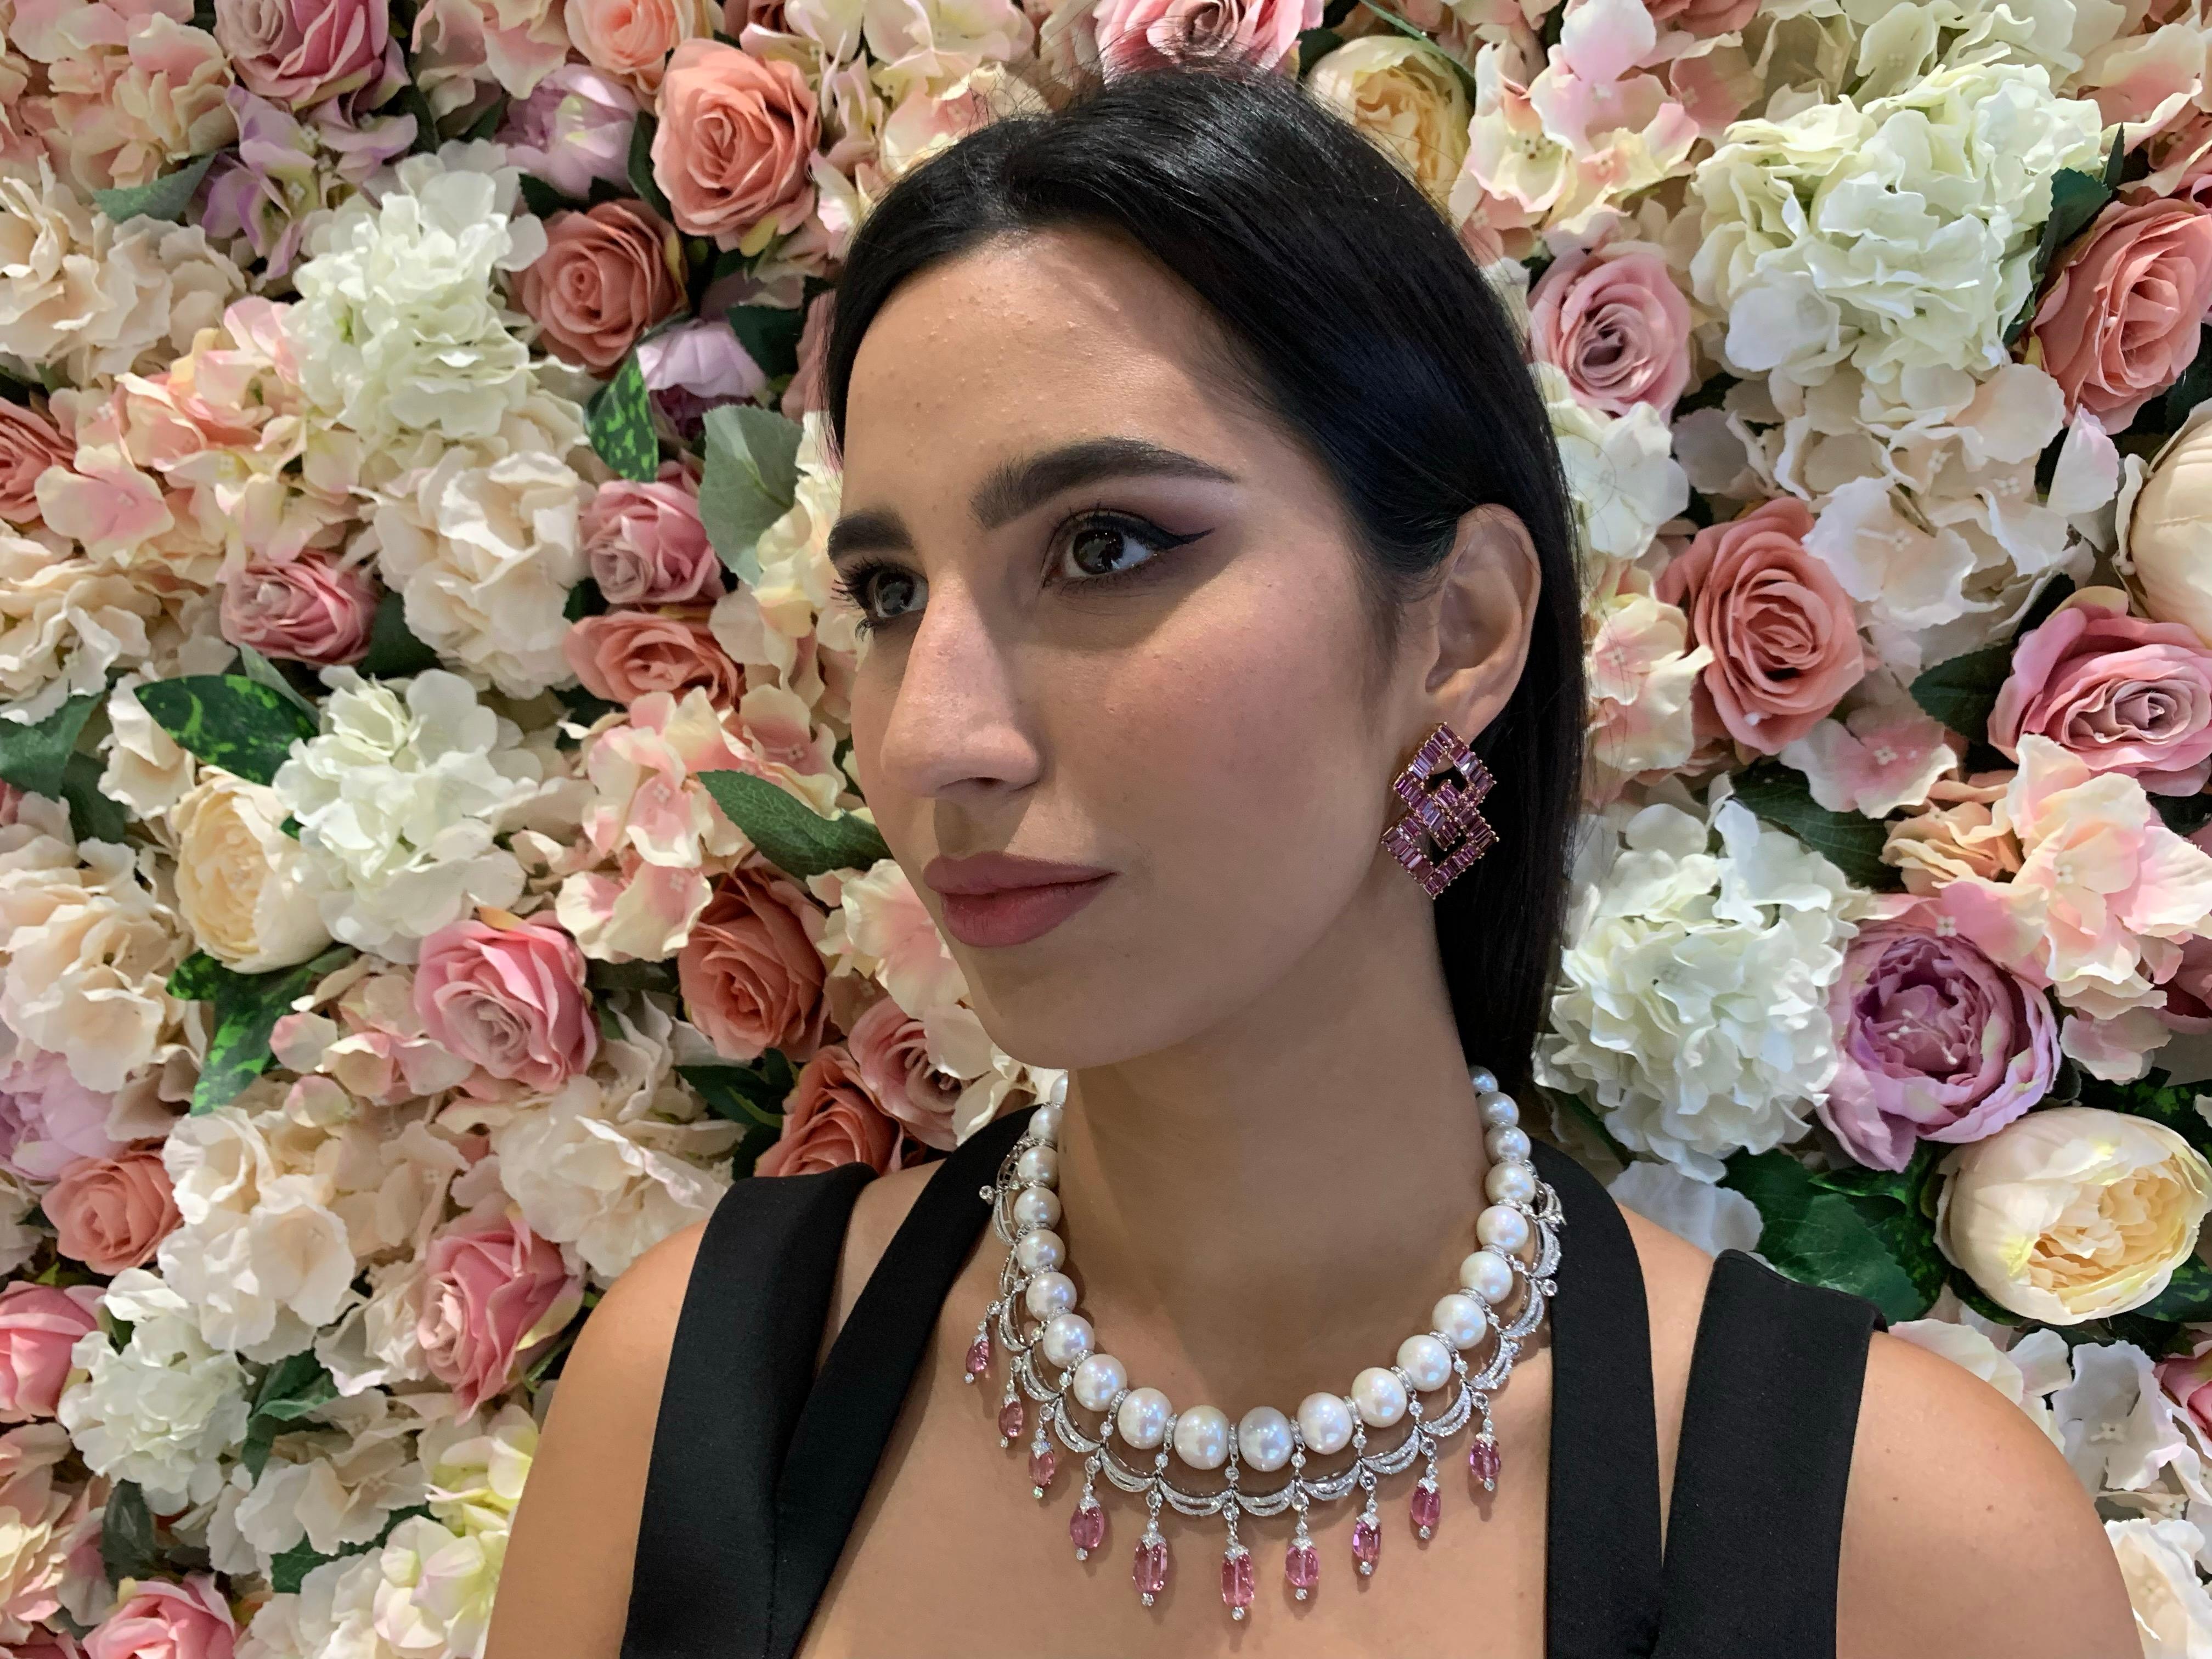 Sunita Nahata presents a modern twist on a classic pearl necklace with the addition of dangling diamonds and pink tourmalines! This necklace is a showstopper and the multi layering of gemstones brings a unique elegance.

Designer pearl necklace in